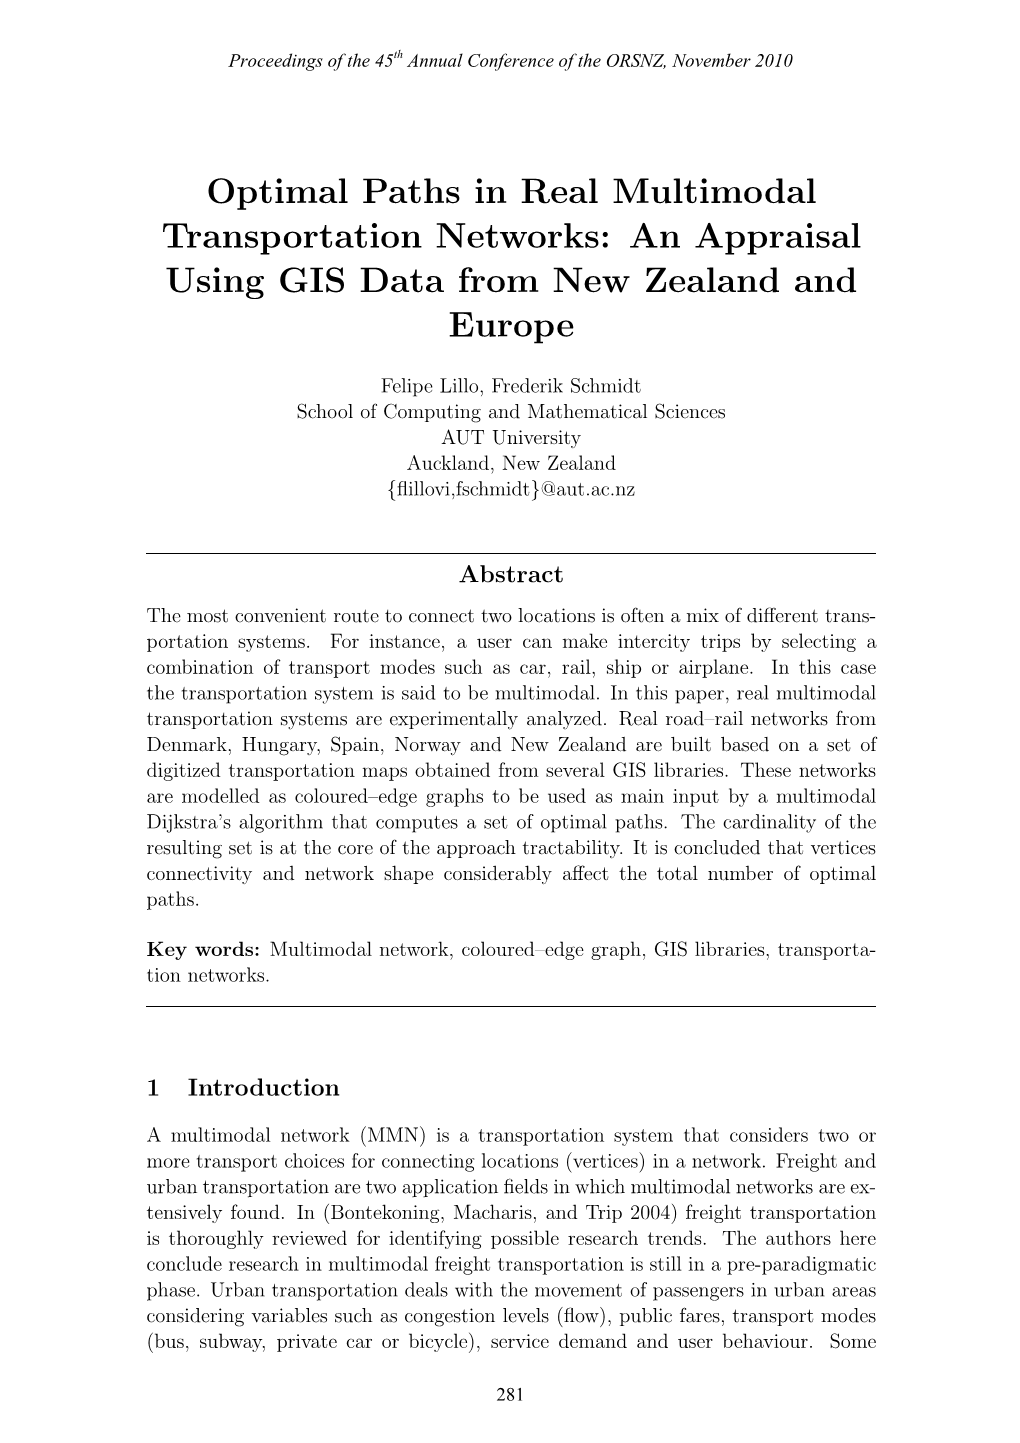 Optimal Paths in Real Multimodal Transportation Networks: an Appraisal Using GIS Data from New Zealand and Europe